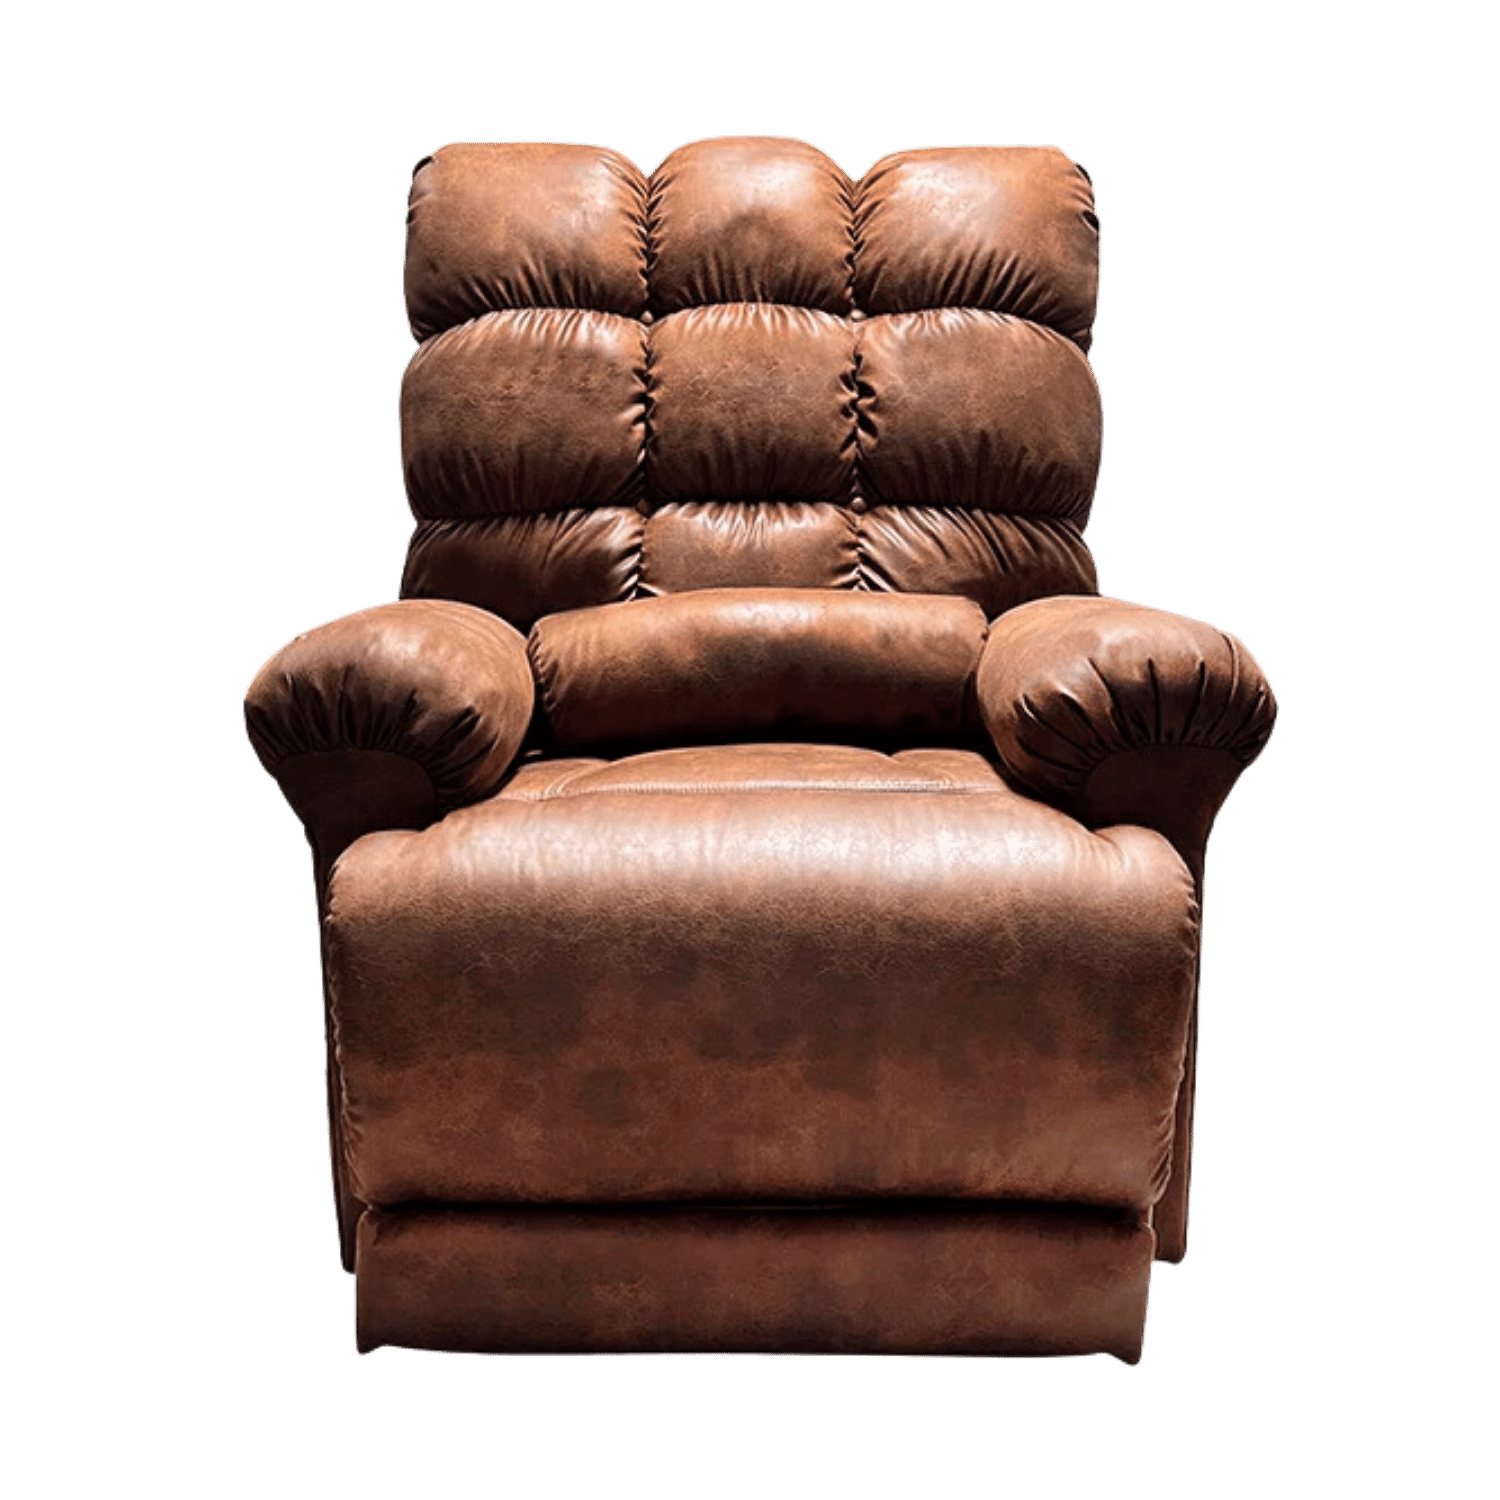 JOURNEY Lift Chair Perfect Sleep Chair Power Recliner - Deluxe 2 Zone